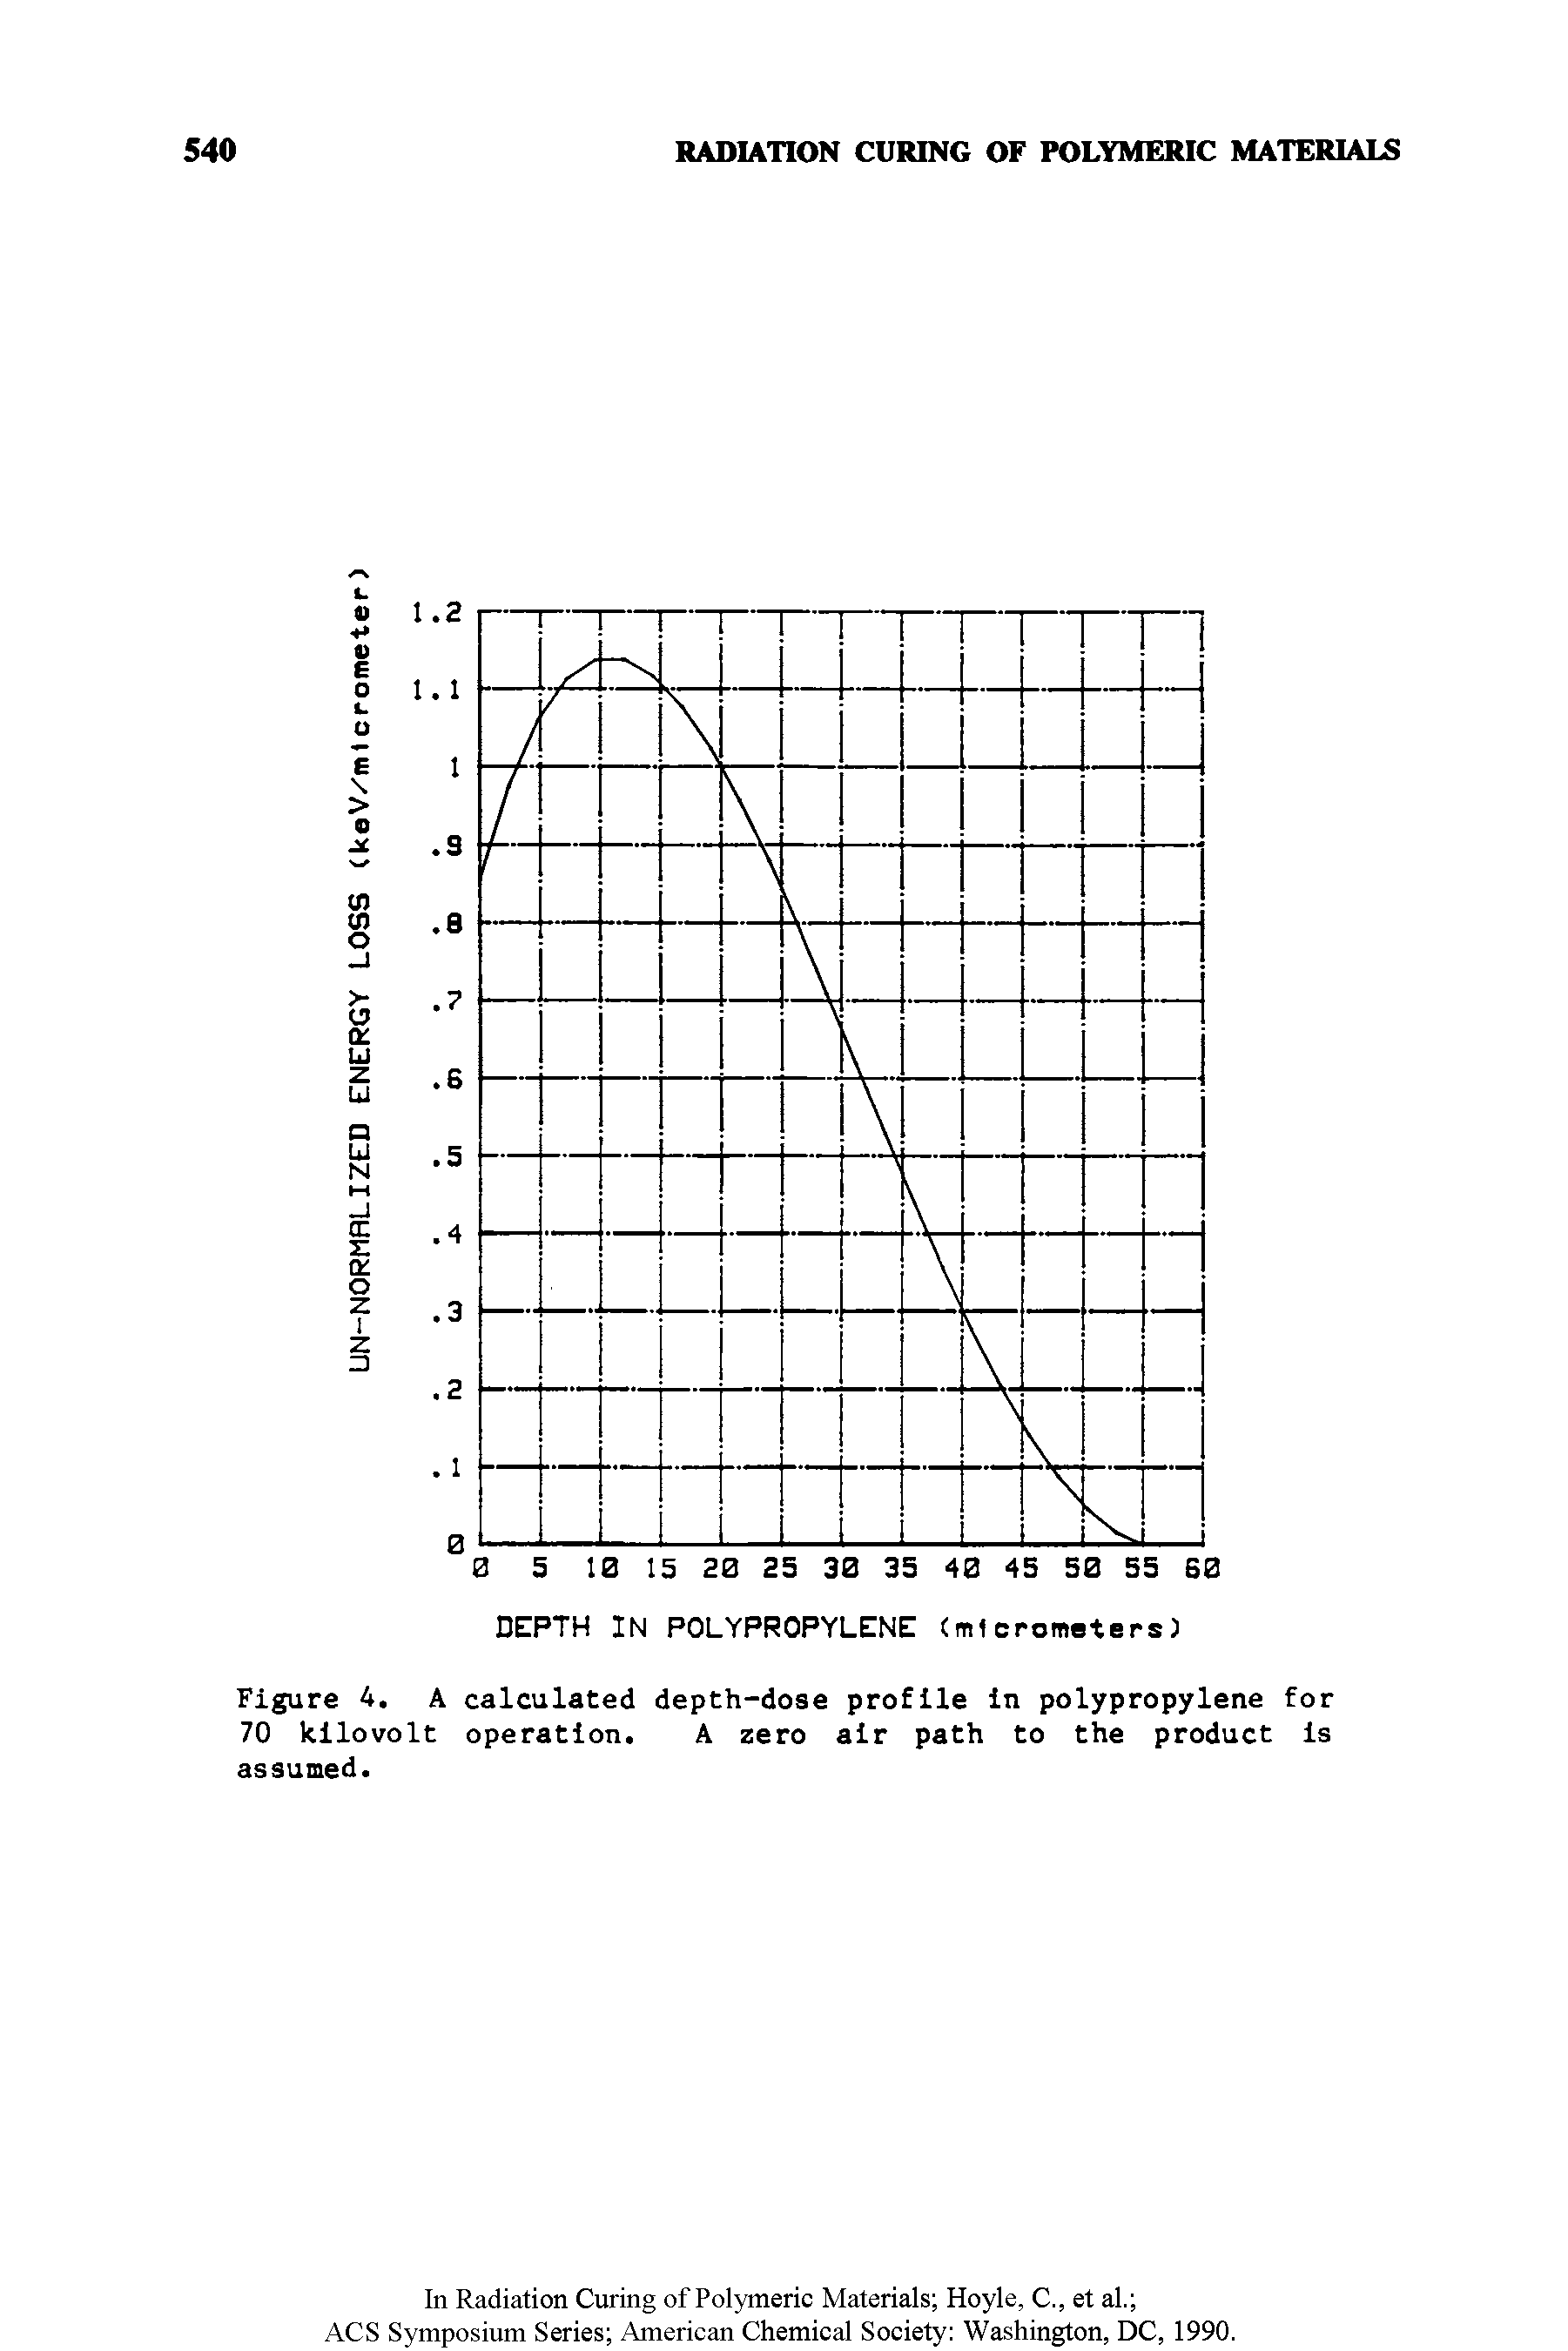 Figure 4. A calculated depth-dose profile in polypropylene for 70 kilovolt operation. A zero air path to the product Is assumed.